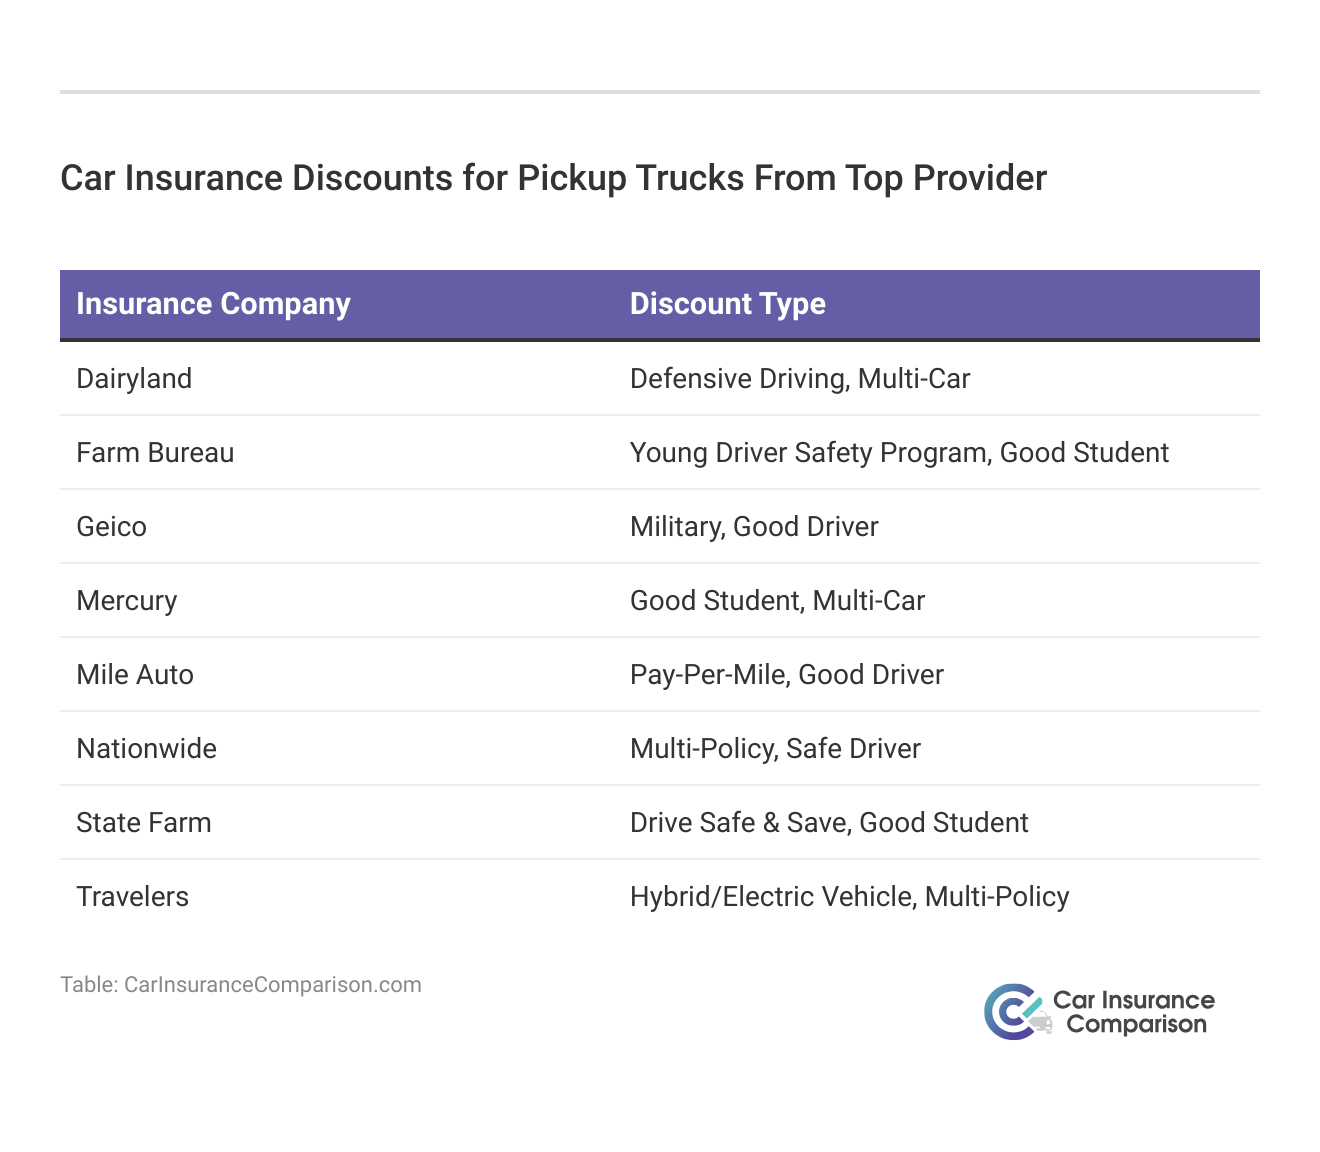 <h3>Car Insurance Discounts for Pickup Trucks From Top Provider</h3>